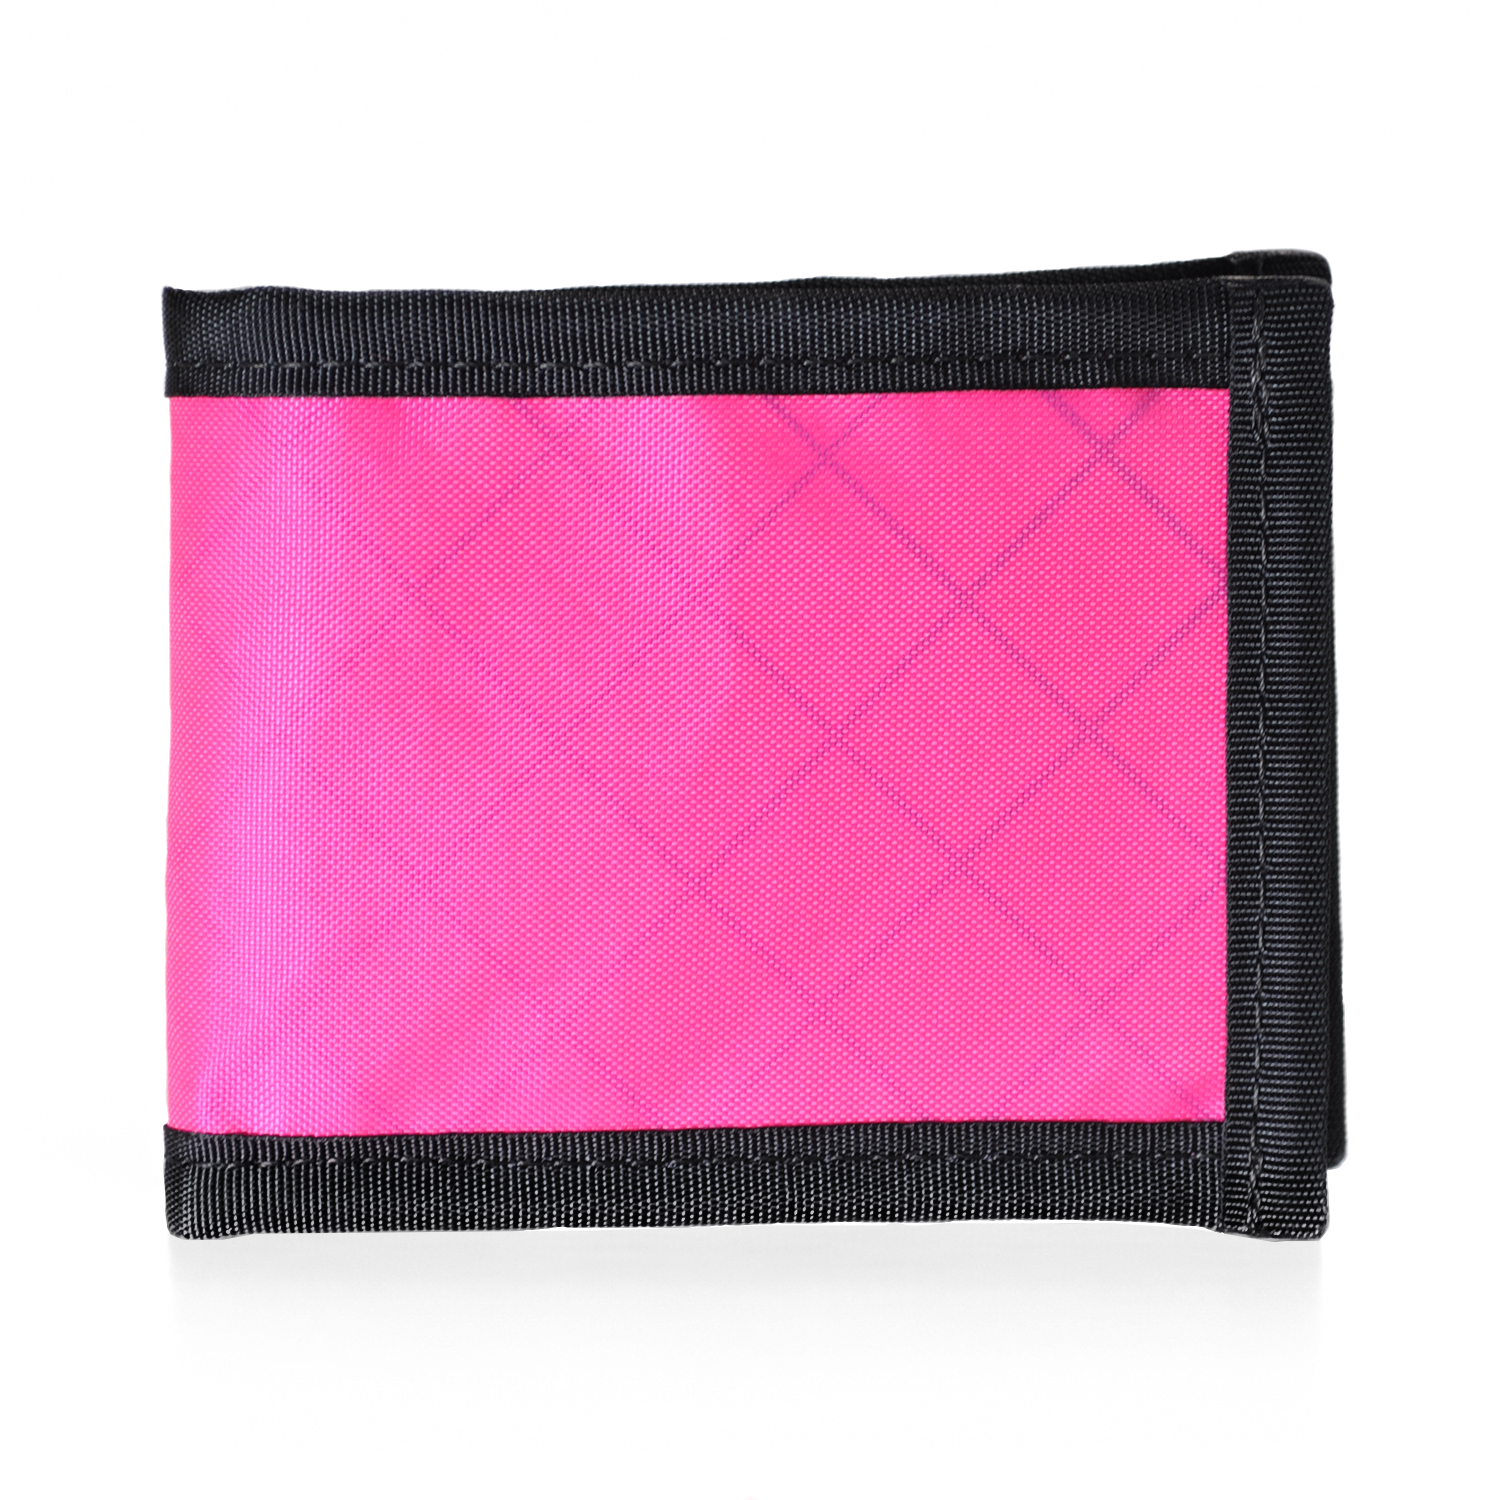 Flowfold Vanguard Bifold Wallet Made in USA, Maine by Flowfold of Recycled Polyester EcoPak Fabric, Hot Pink